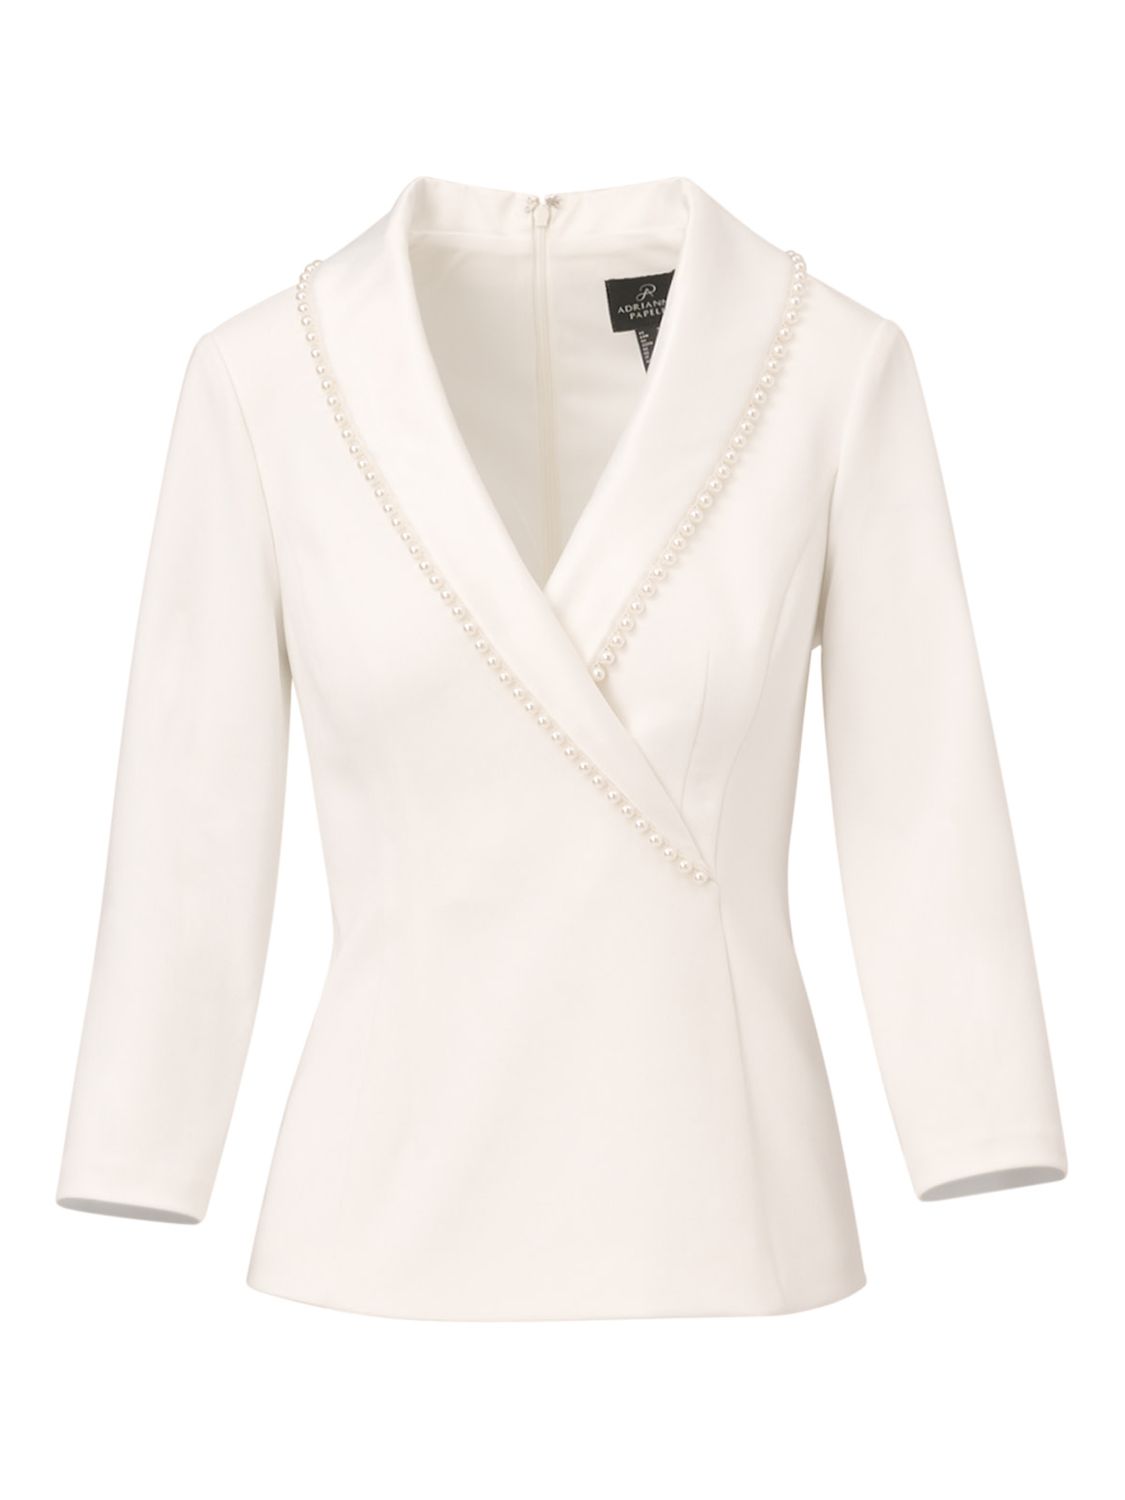 Adrianna Papell Crepe Pearl Tuxedo Top, Ivory at John Lewis & Partners